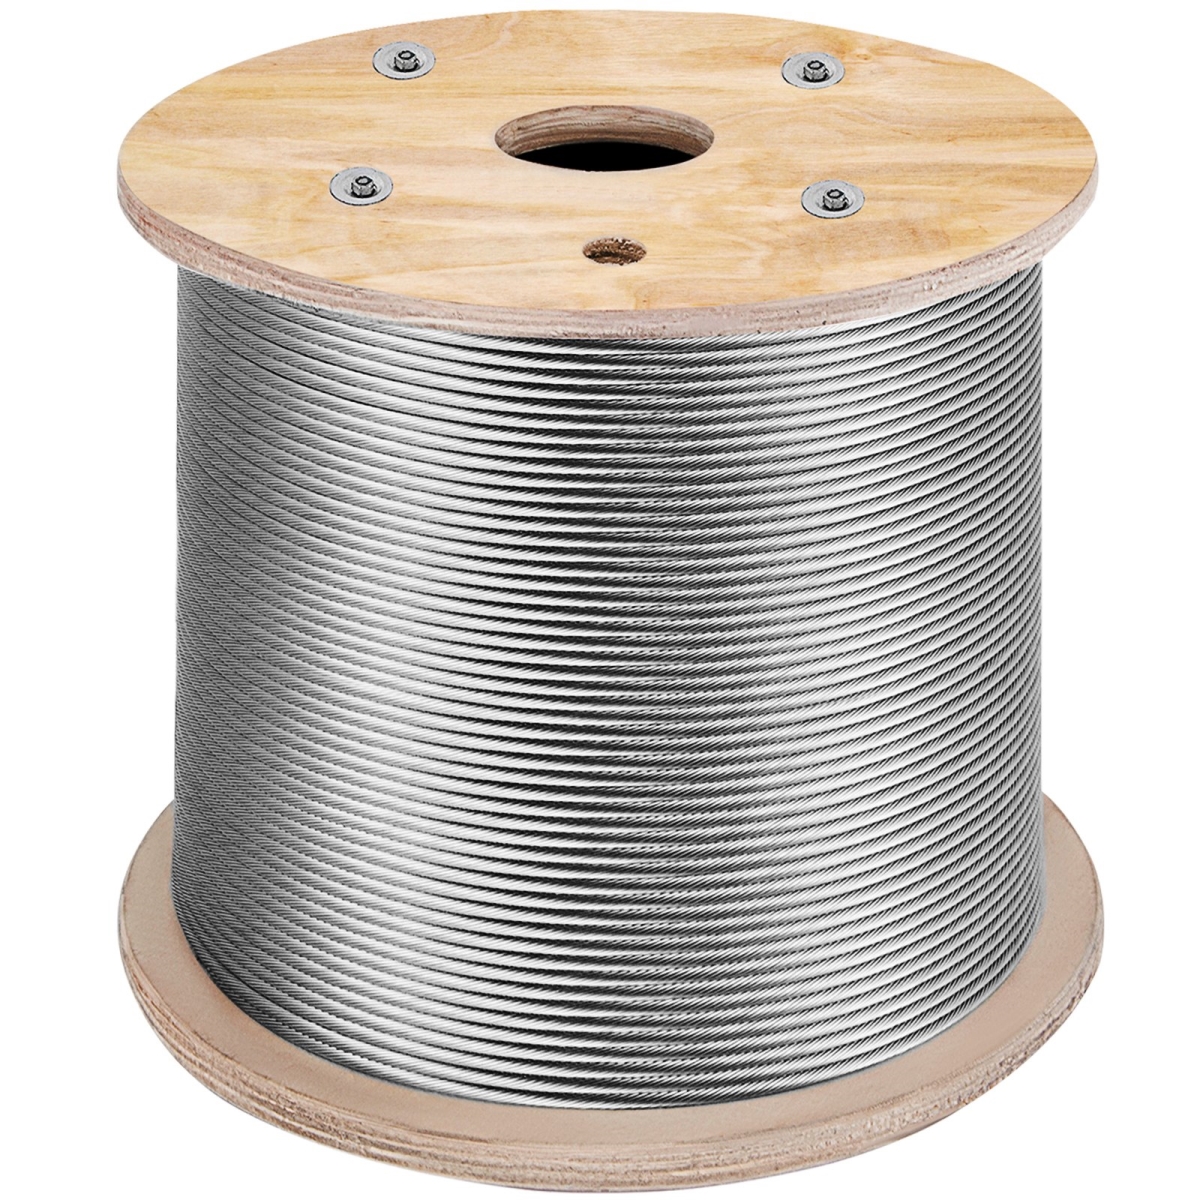 Picture of Vevor 316BXGGSS300M0001V0 0.13 x 1000 ft. T316 Stainless Steel Cable